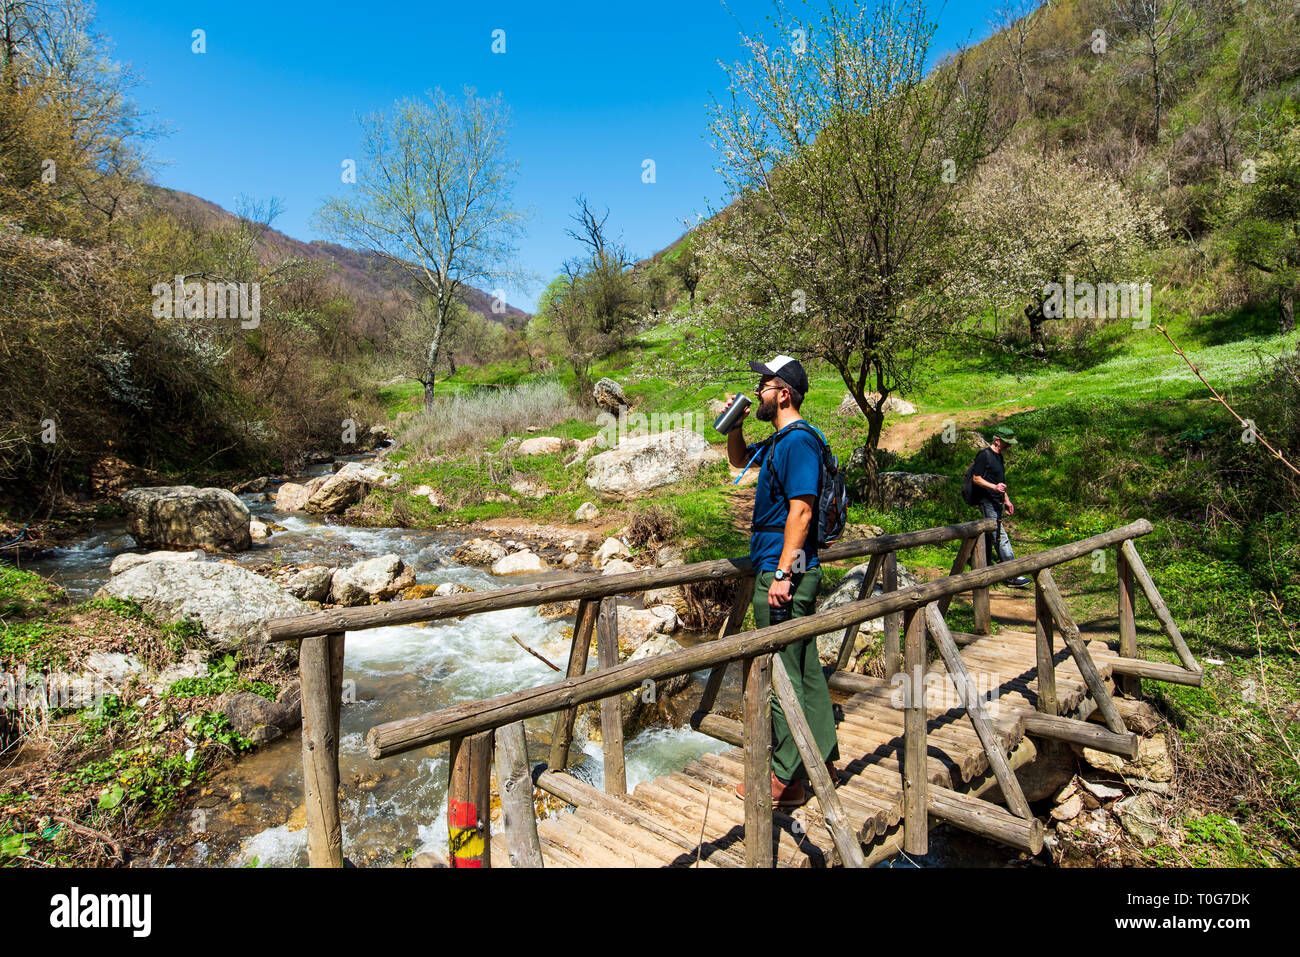 Man drinking water the wooden bridge over small river outdoors Stock Photo